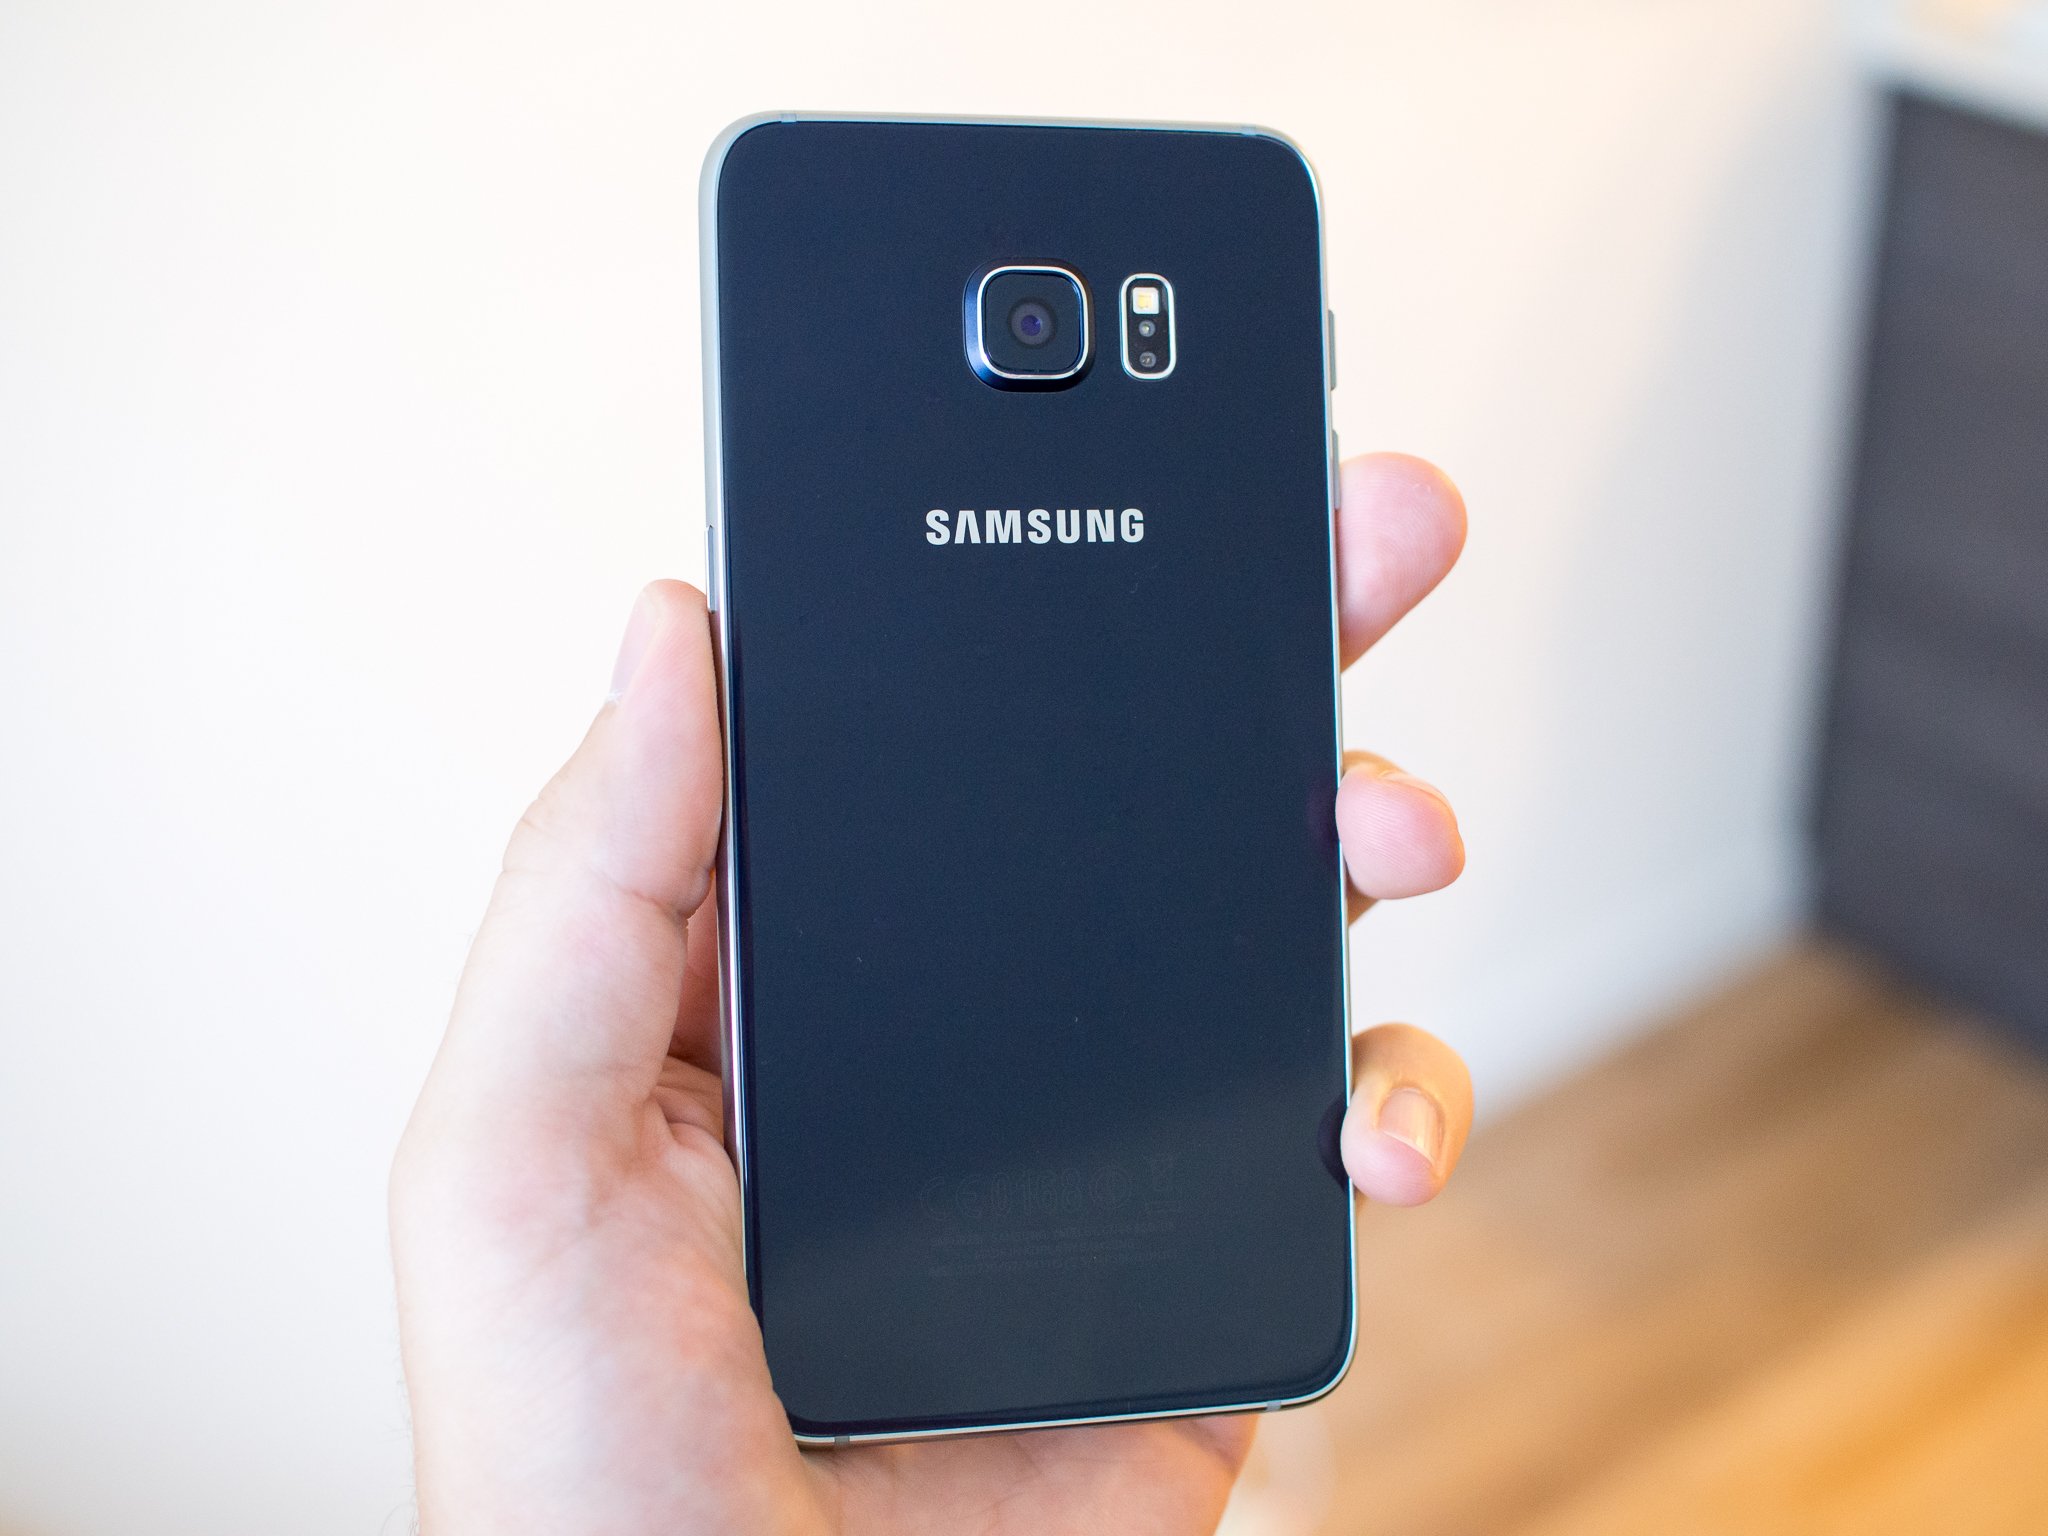 Marshmallow rolls out to the T-Mobile Samsung Galaxy S6 edge+